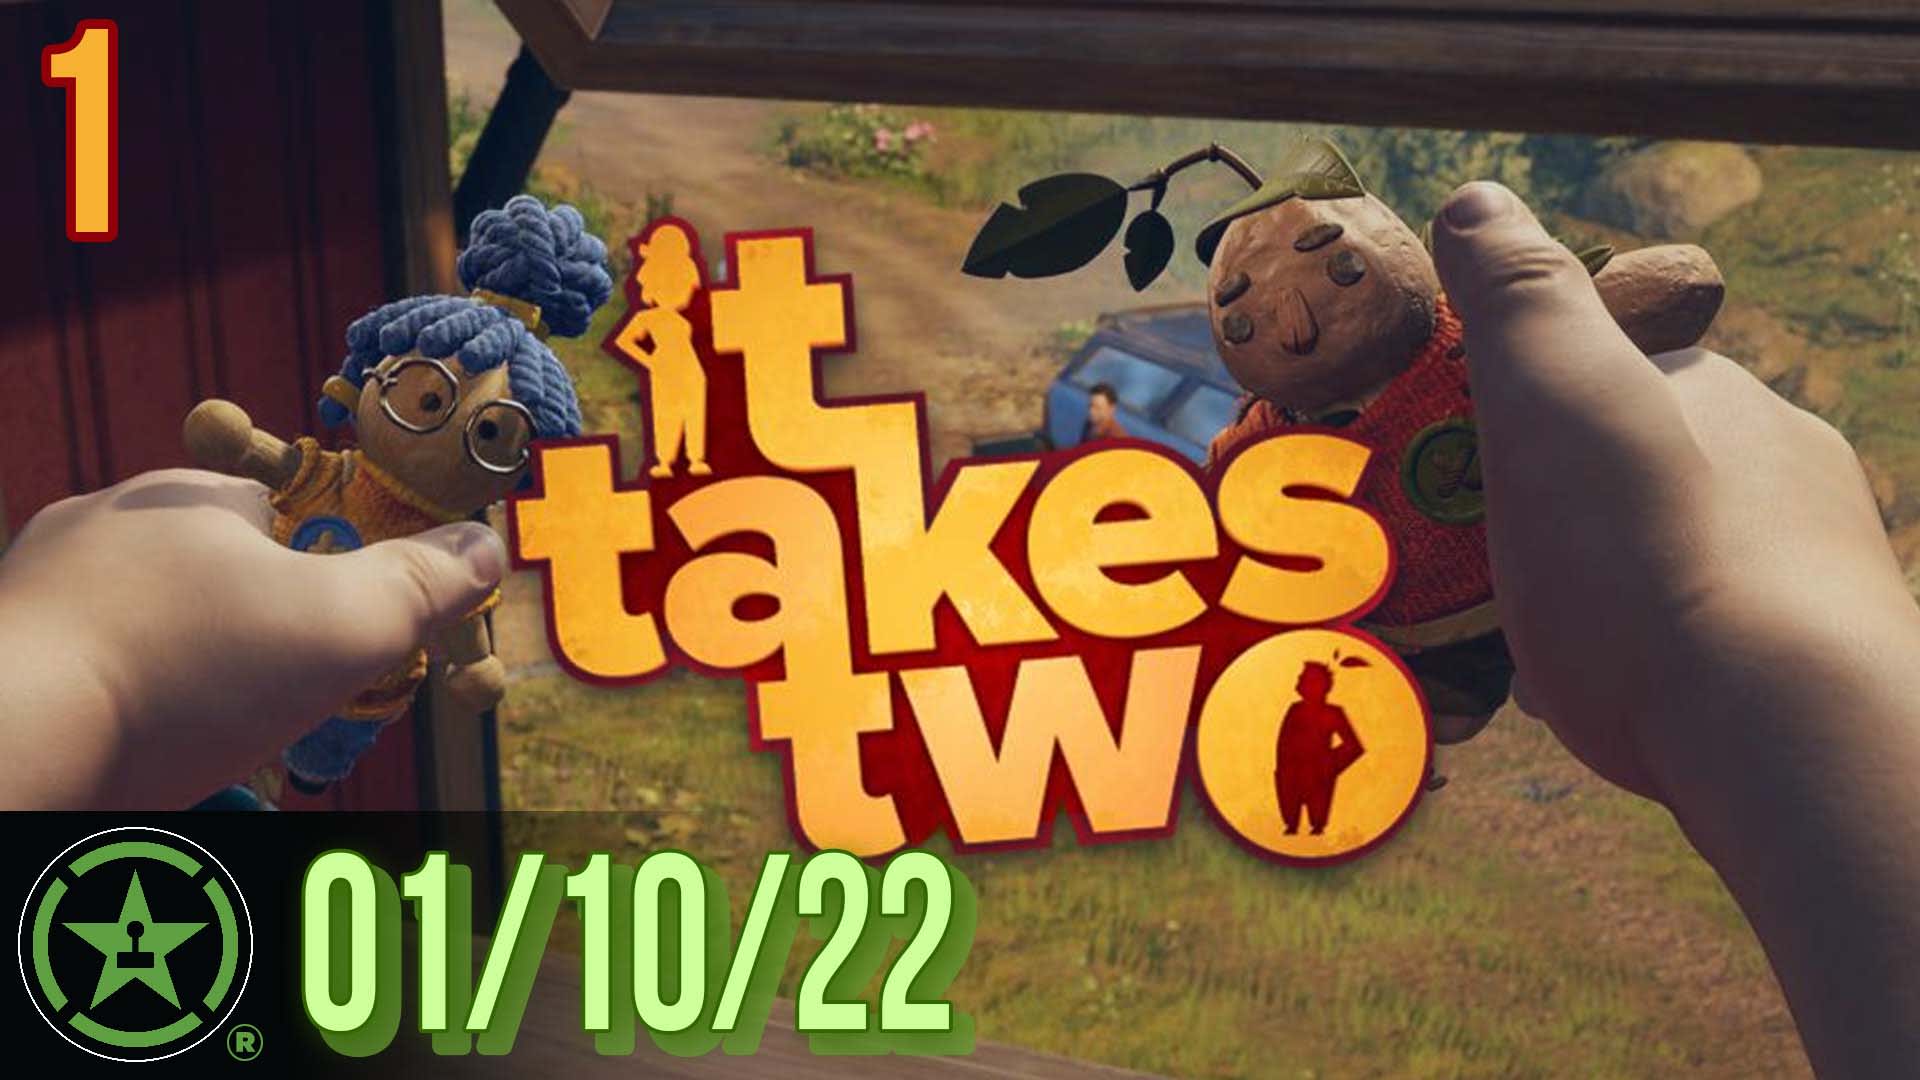 It Takes Two: Everything you Need to Know - Fierce PC Blog